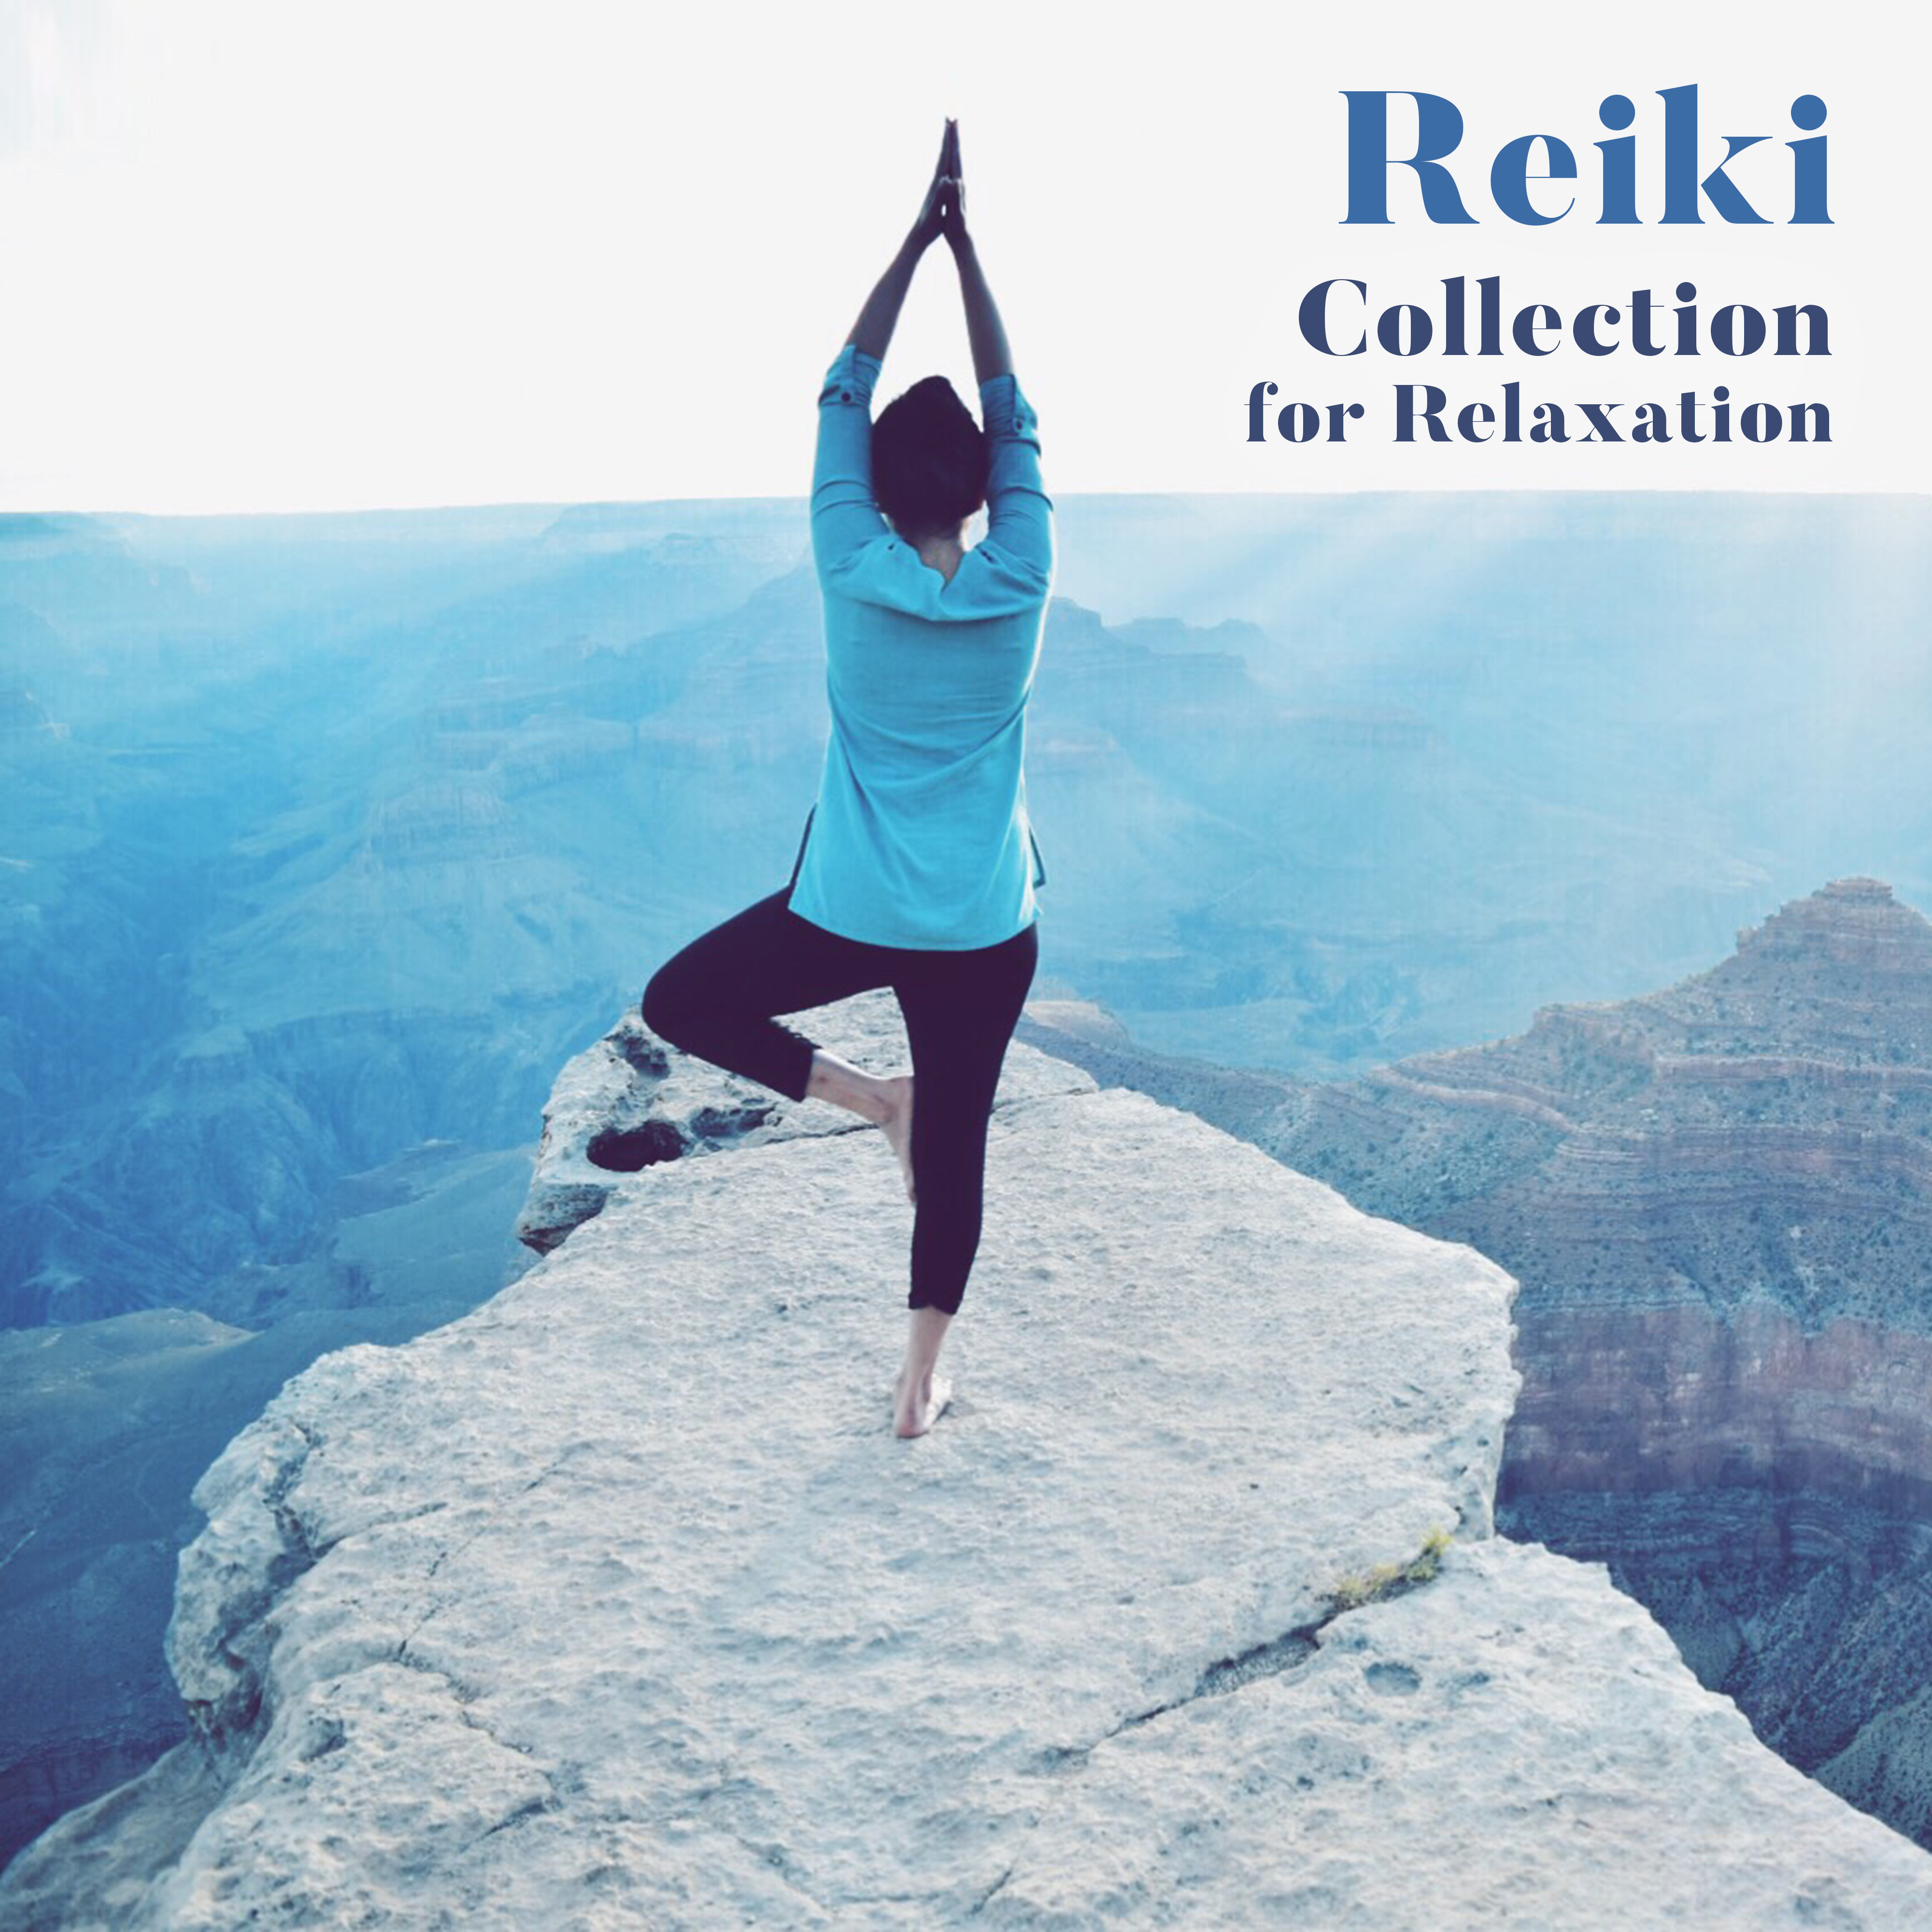 Reiki Collection for Relaxation